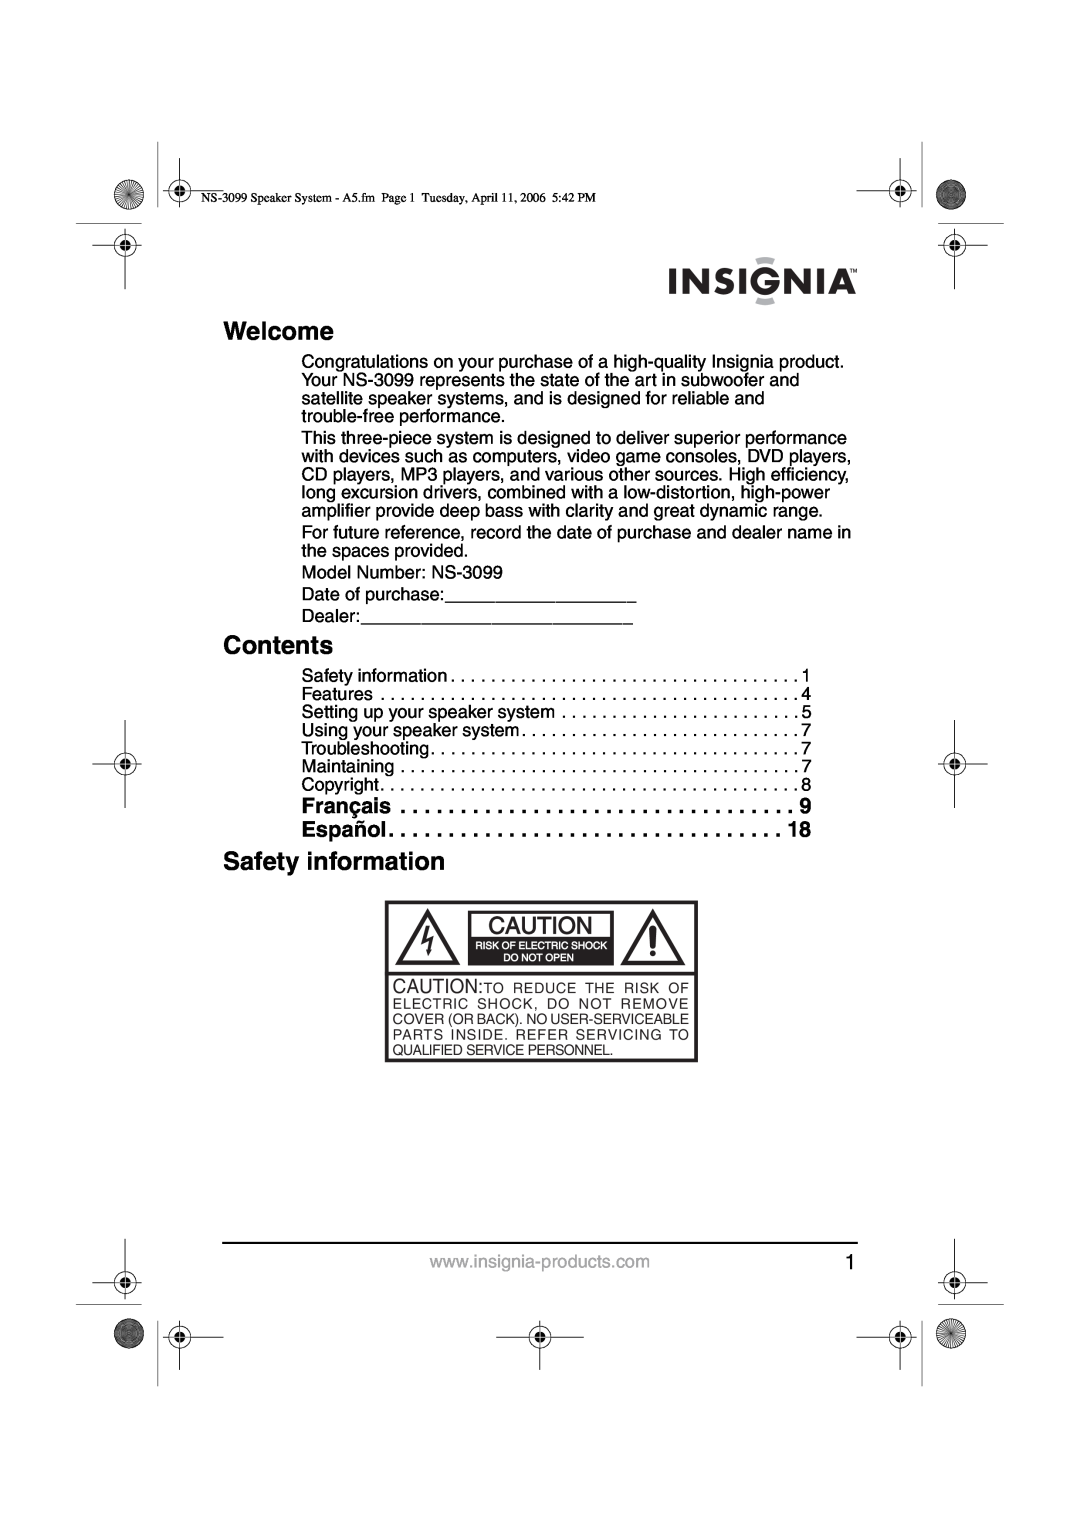 Insignia NS-3099 manual Welcome, Contents, Safety information 